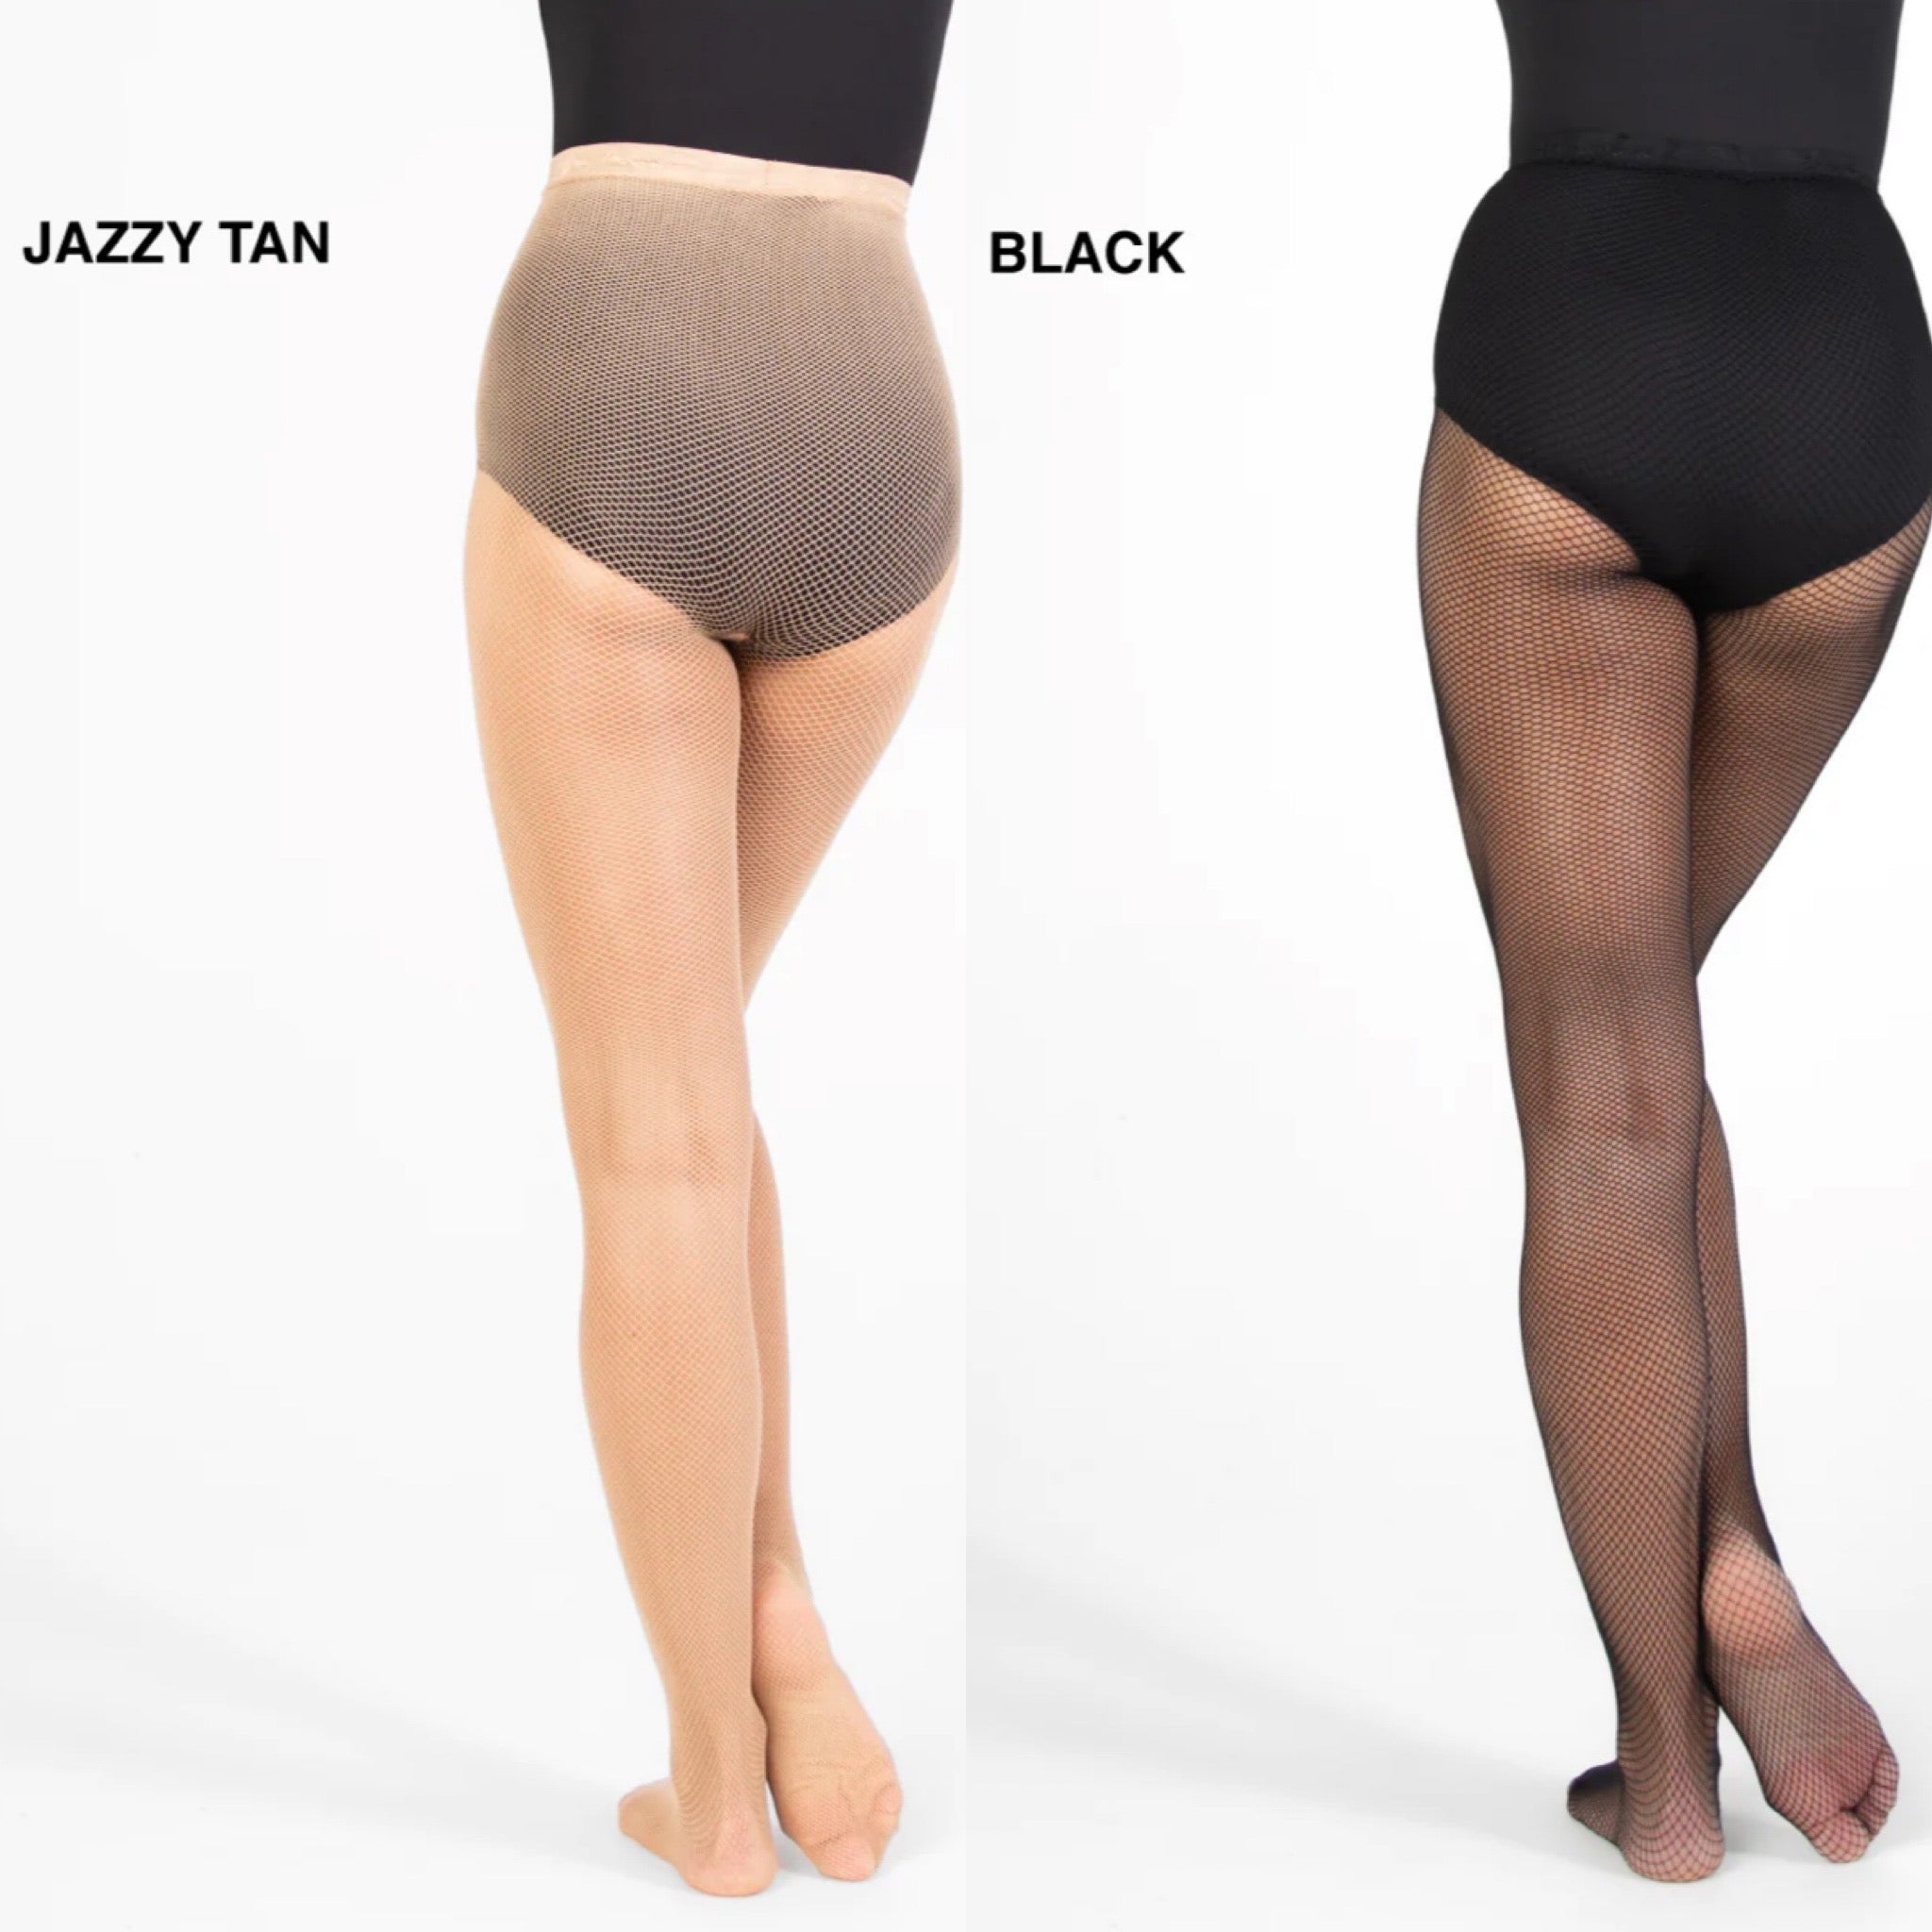 BODY WRAPPERS A61 TOTAL STRETCH SEAMLESS FISHNET TIGHTS – The Dance Shoppe